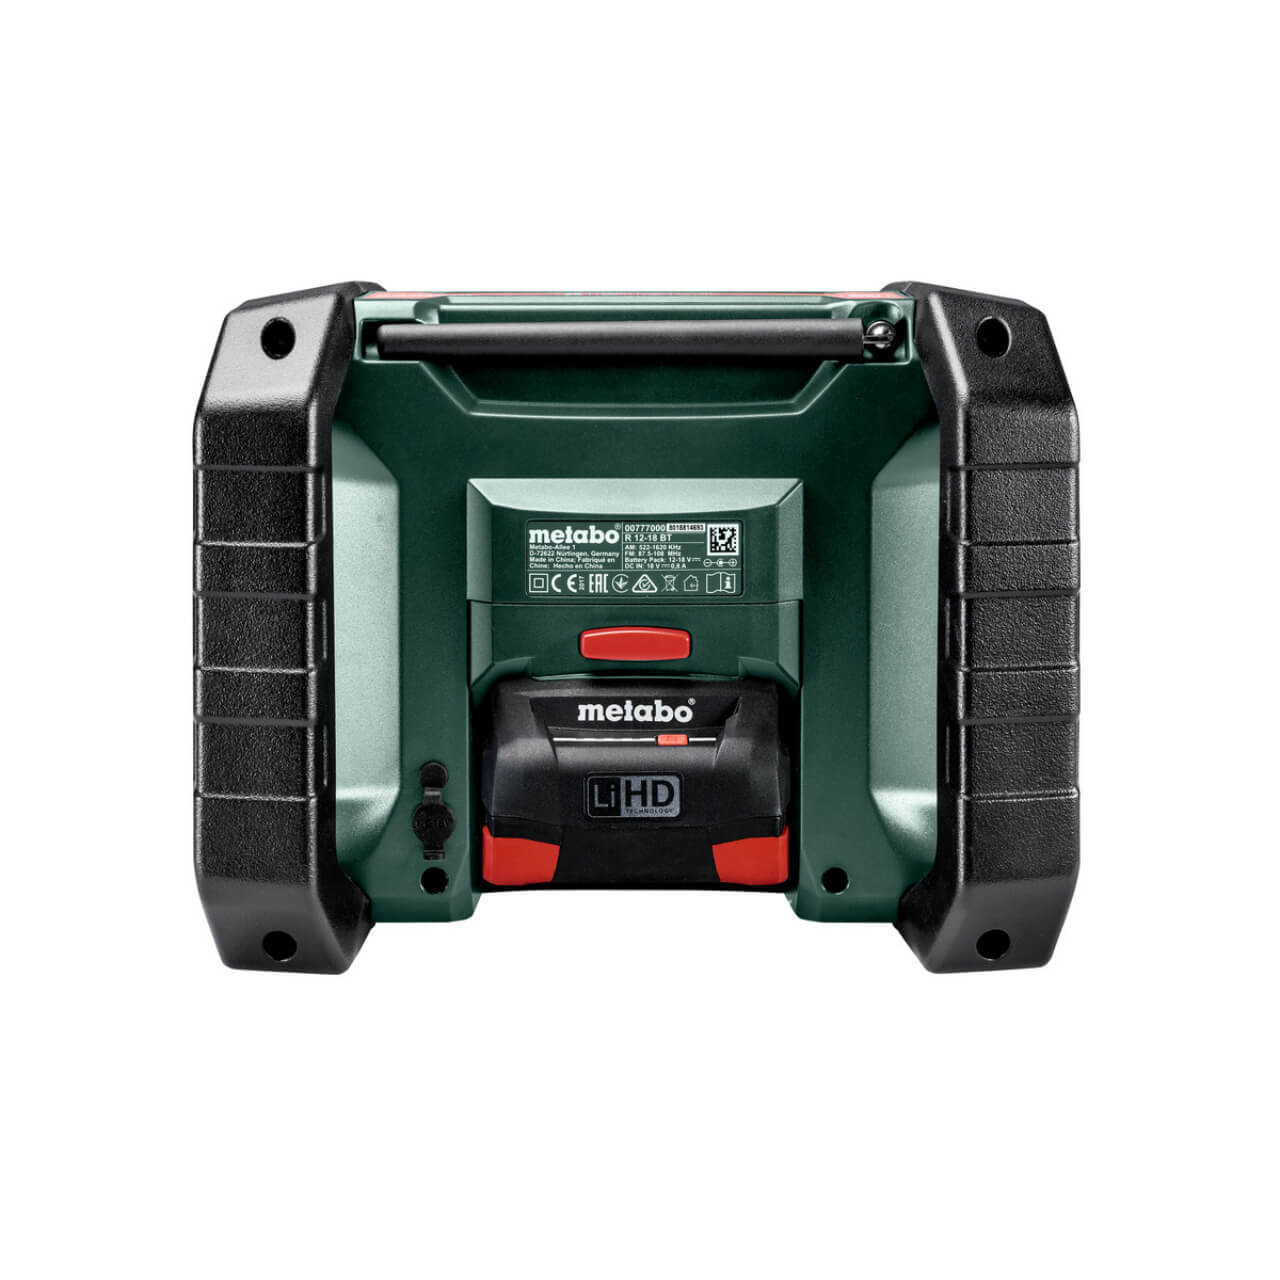 Metabo R 12-18 DAB+ BT 12V/18V Compact AM/FM worksite radio with digital DAB+ and Bluetooth - Skin Only